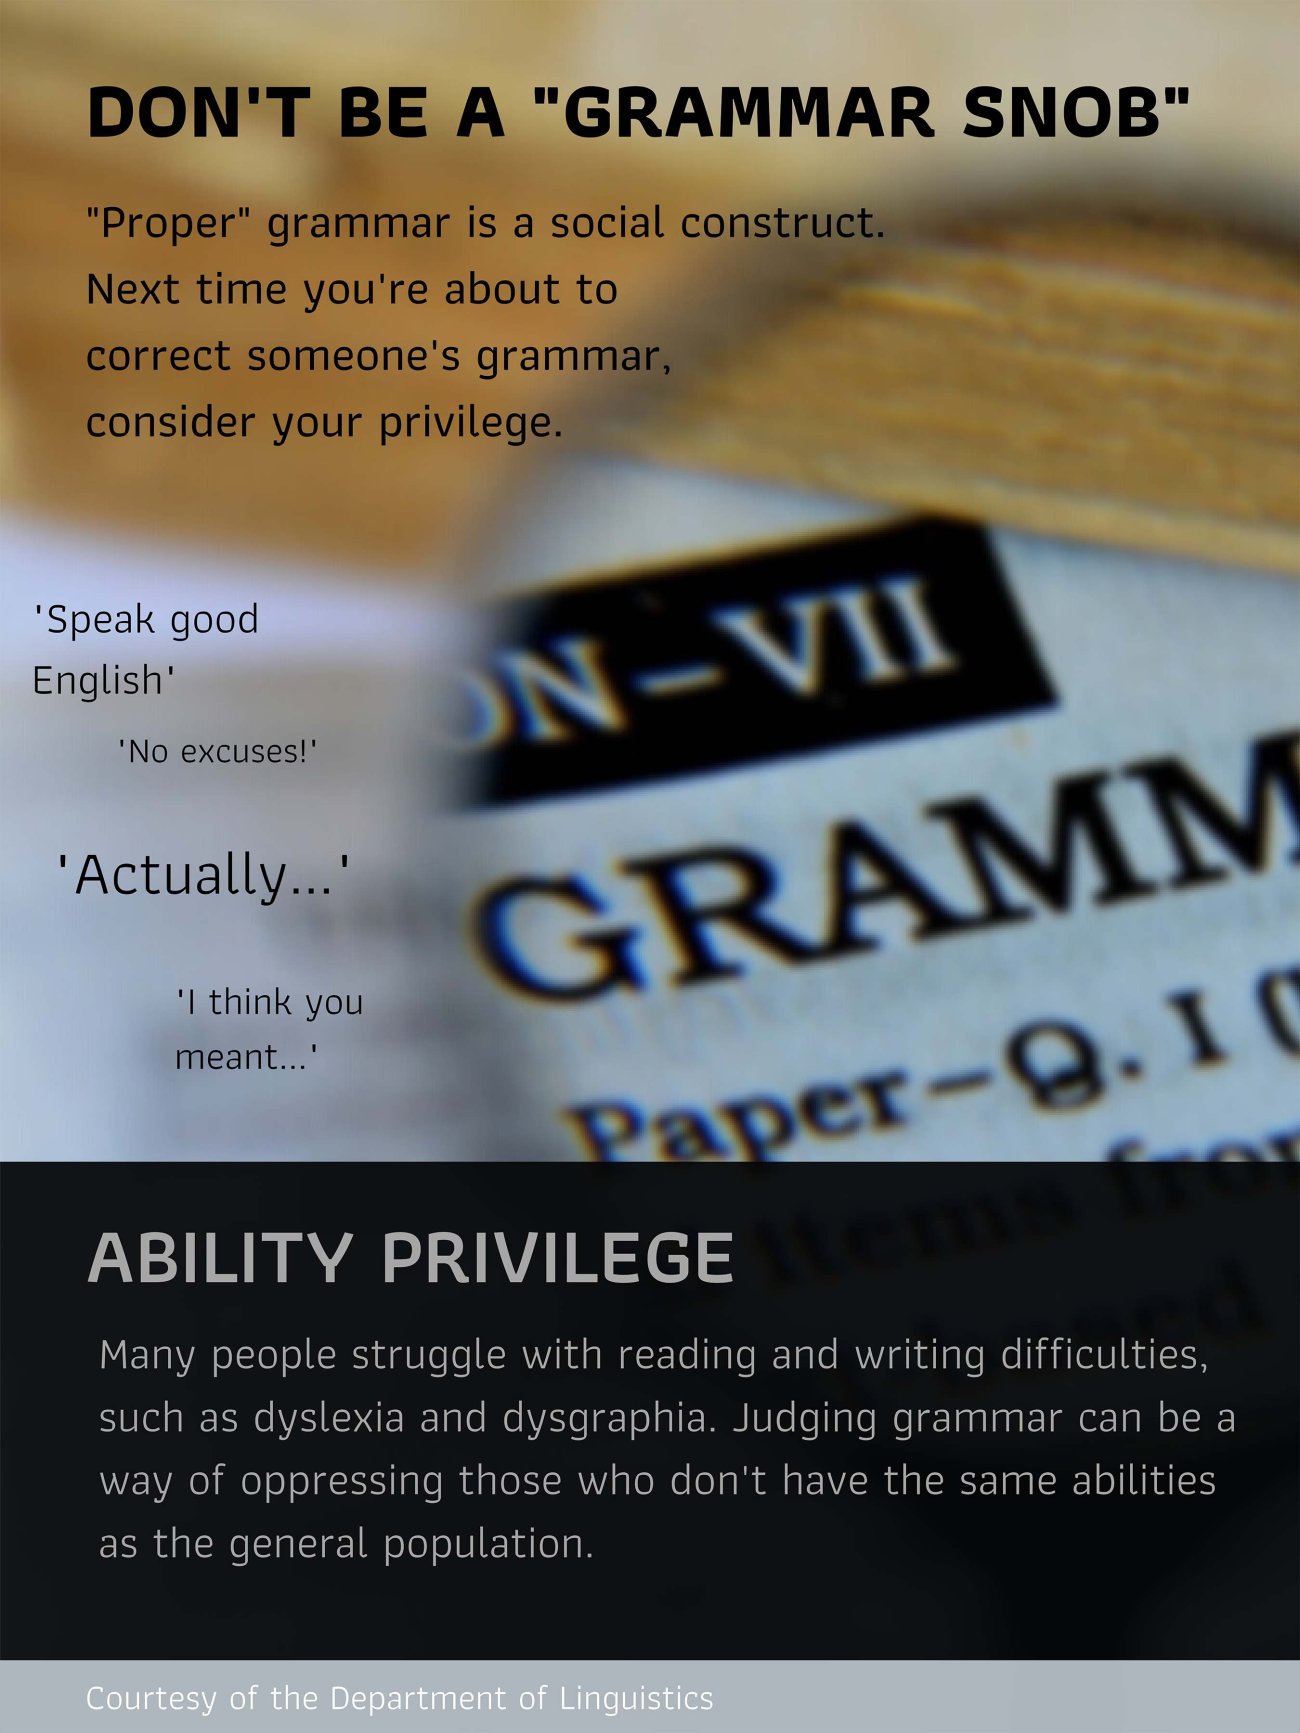 Don't be a grammar snob. Consider your ability privilege. Click on image to see full description.